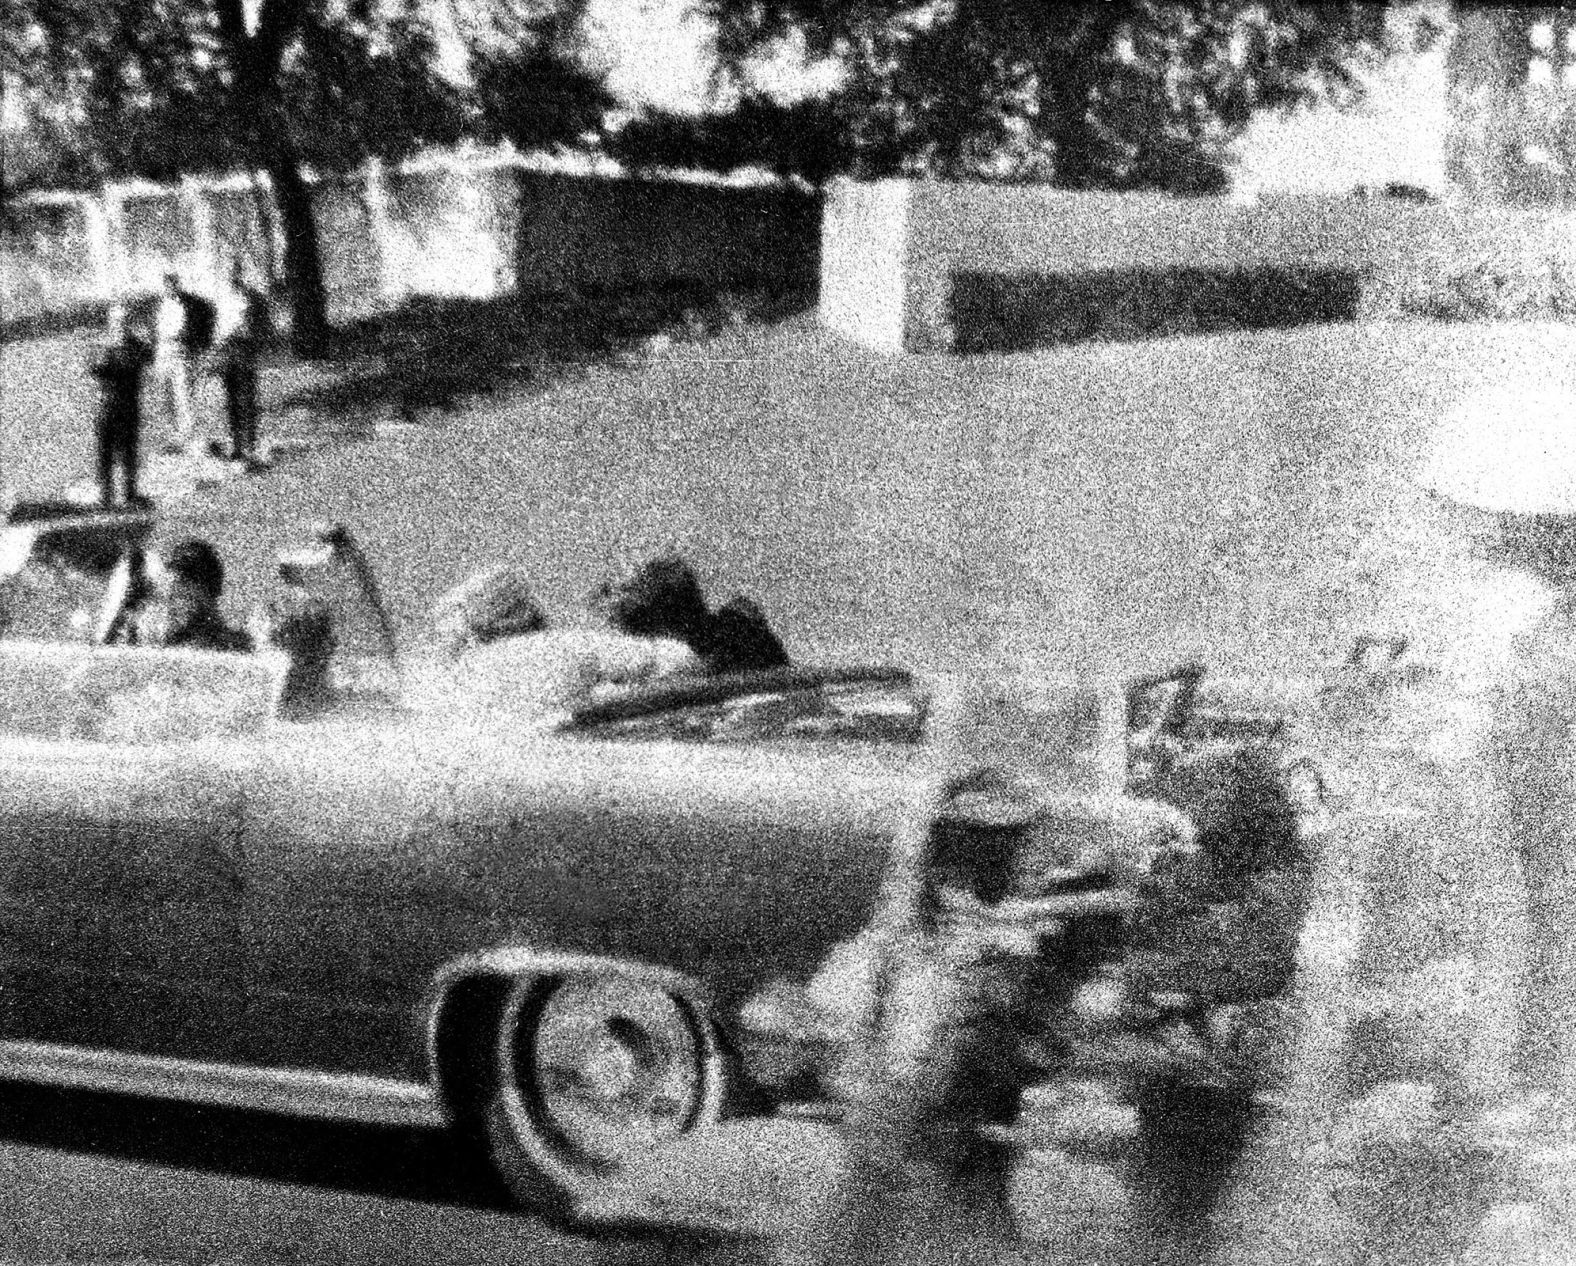 Kennedy slumps against his wife as a bullet strikes him in the head. Wire services reported that three shots were fired as the motorcade passed under the Stemmons Freeway. Two bullets hit the president and one hit the governor.